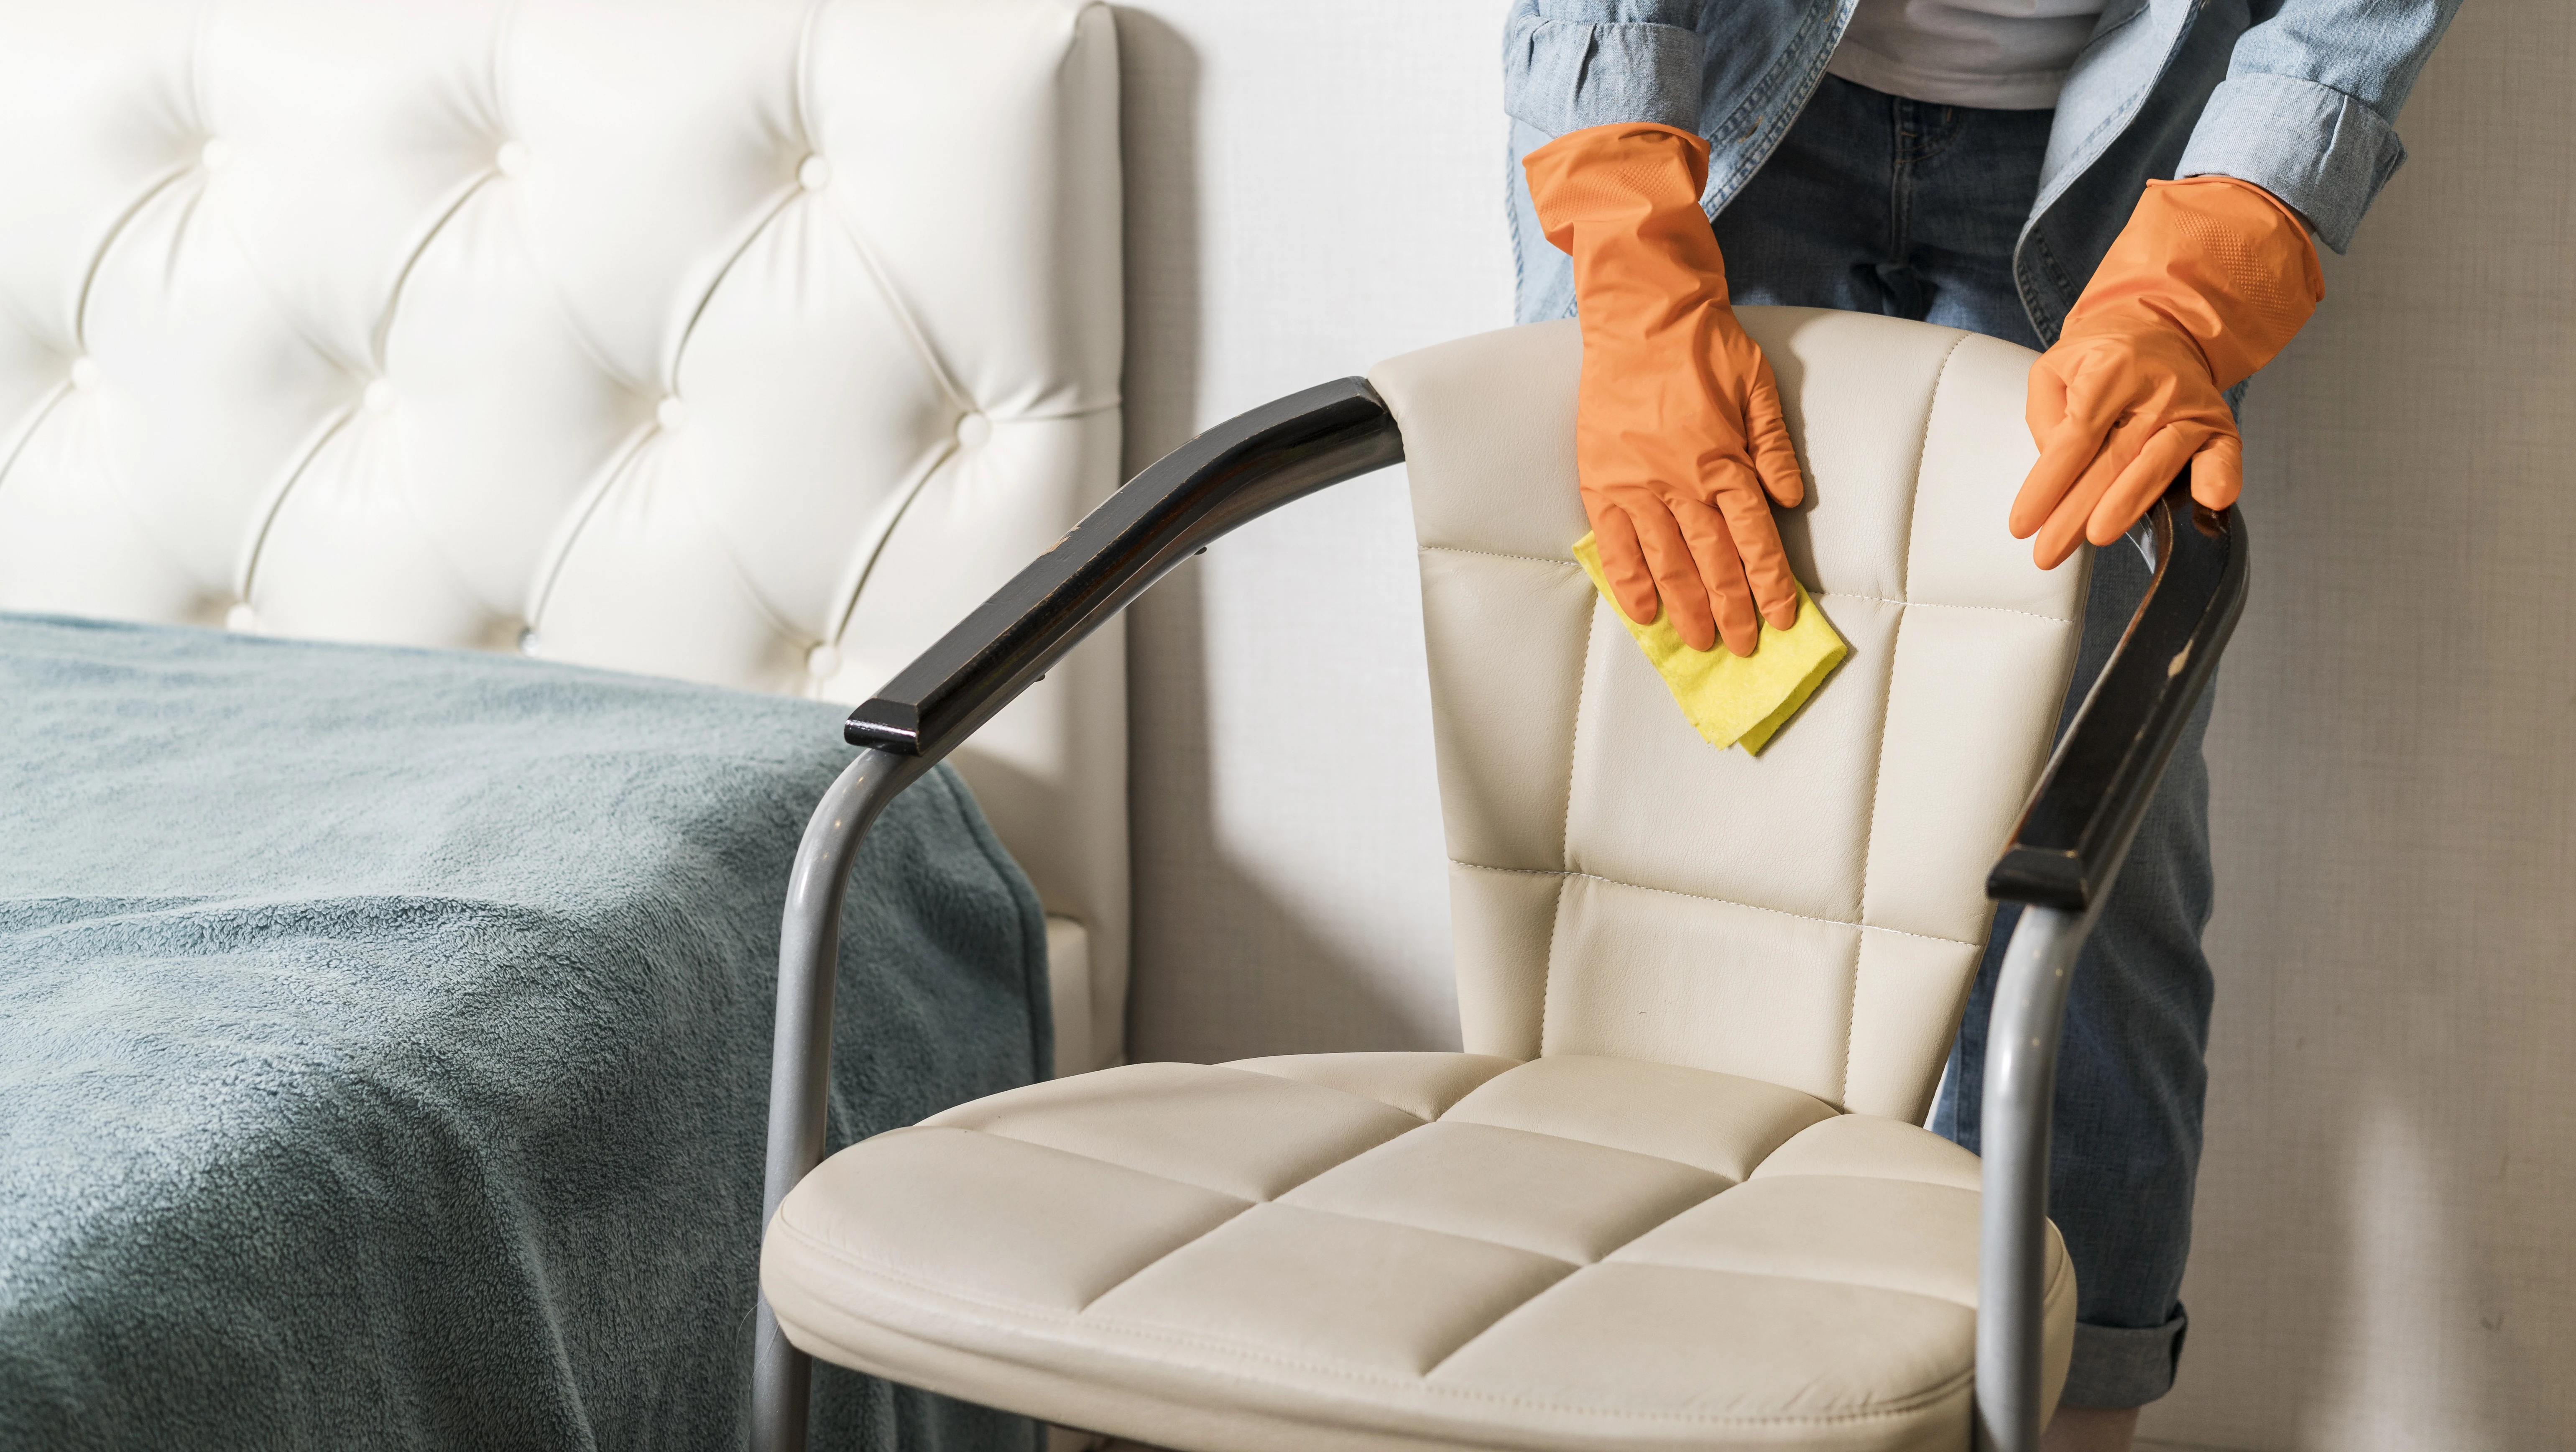 275-front-view-woman-cleaning-chair-16925560712275.jpg